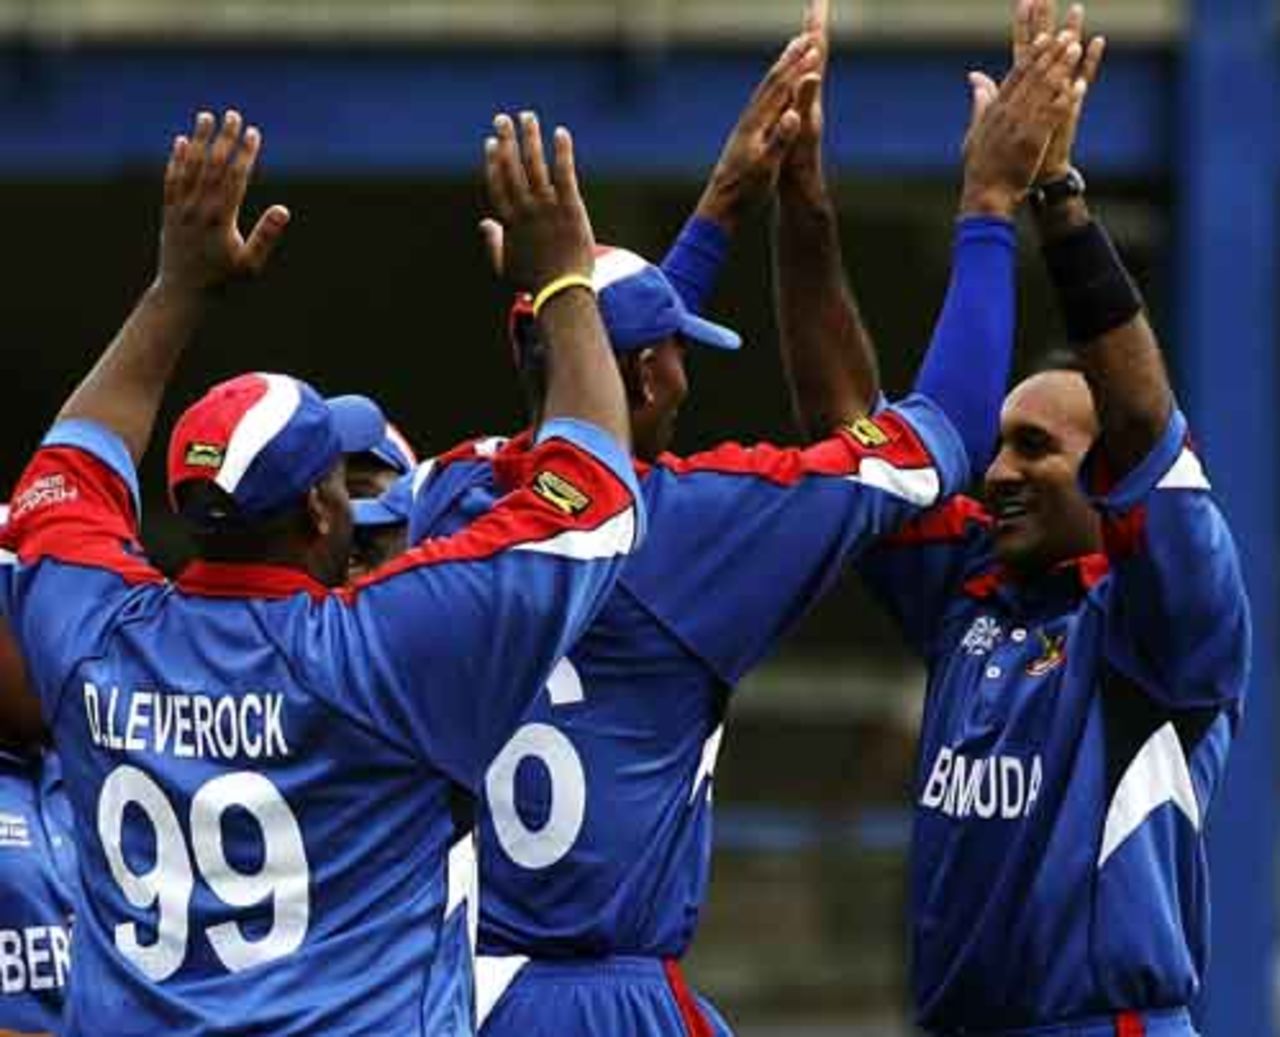 Saleem Mukuddem is the toast of his team as he gets the breakthrough against the strong Sri Lankans, Bermuda v Sri Lanka, Group B, Port of Spain, March 15, 2007